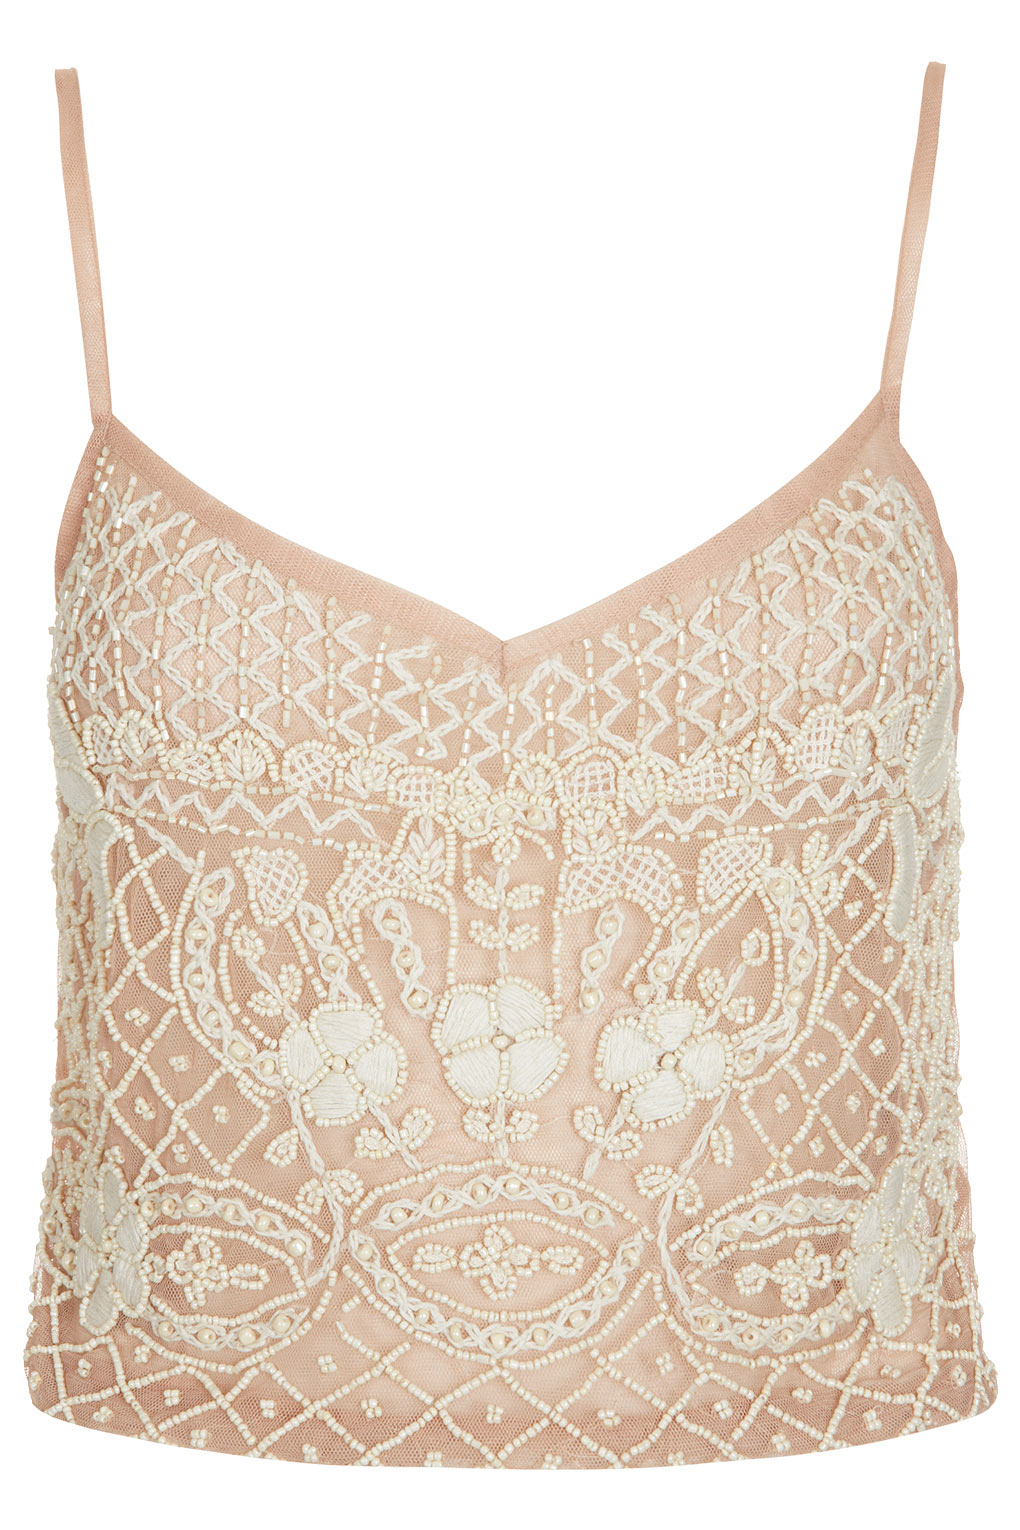 Topshop Heavy Embellished Cami Top in Pink | Lyst